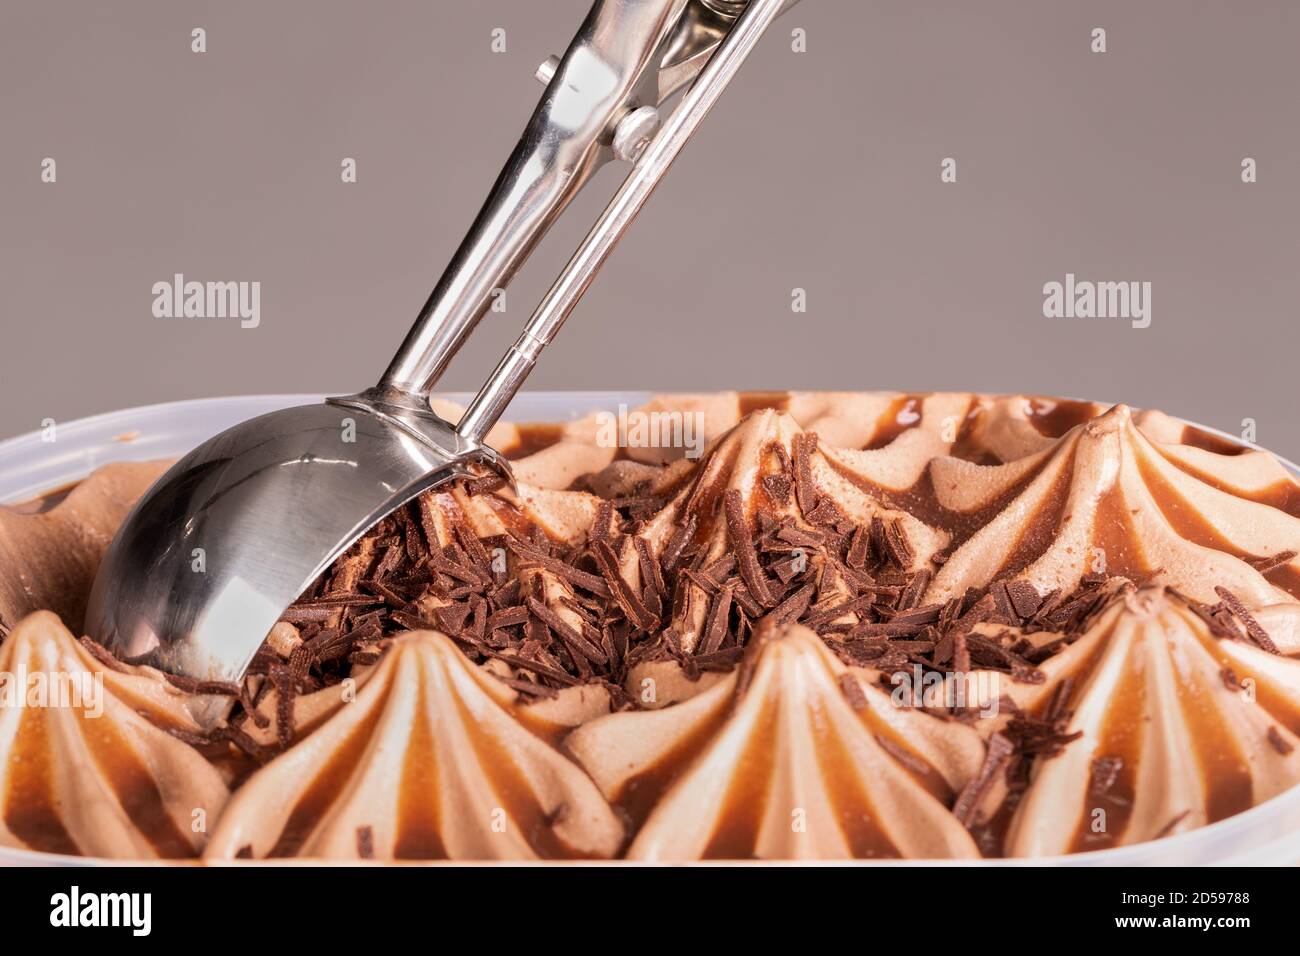 Close up of a mechanical ice cream scoop gathering up ice cream to be served. Stock Photo